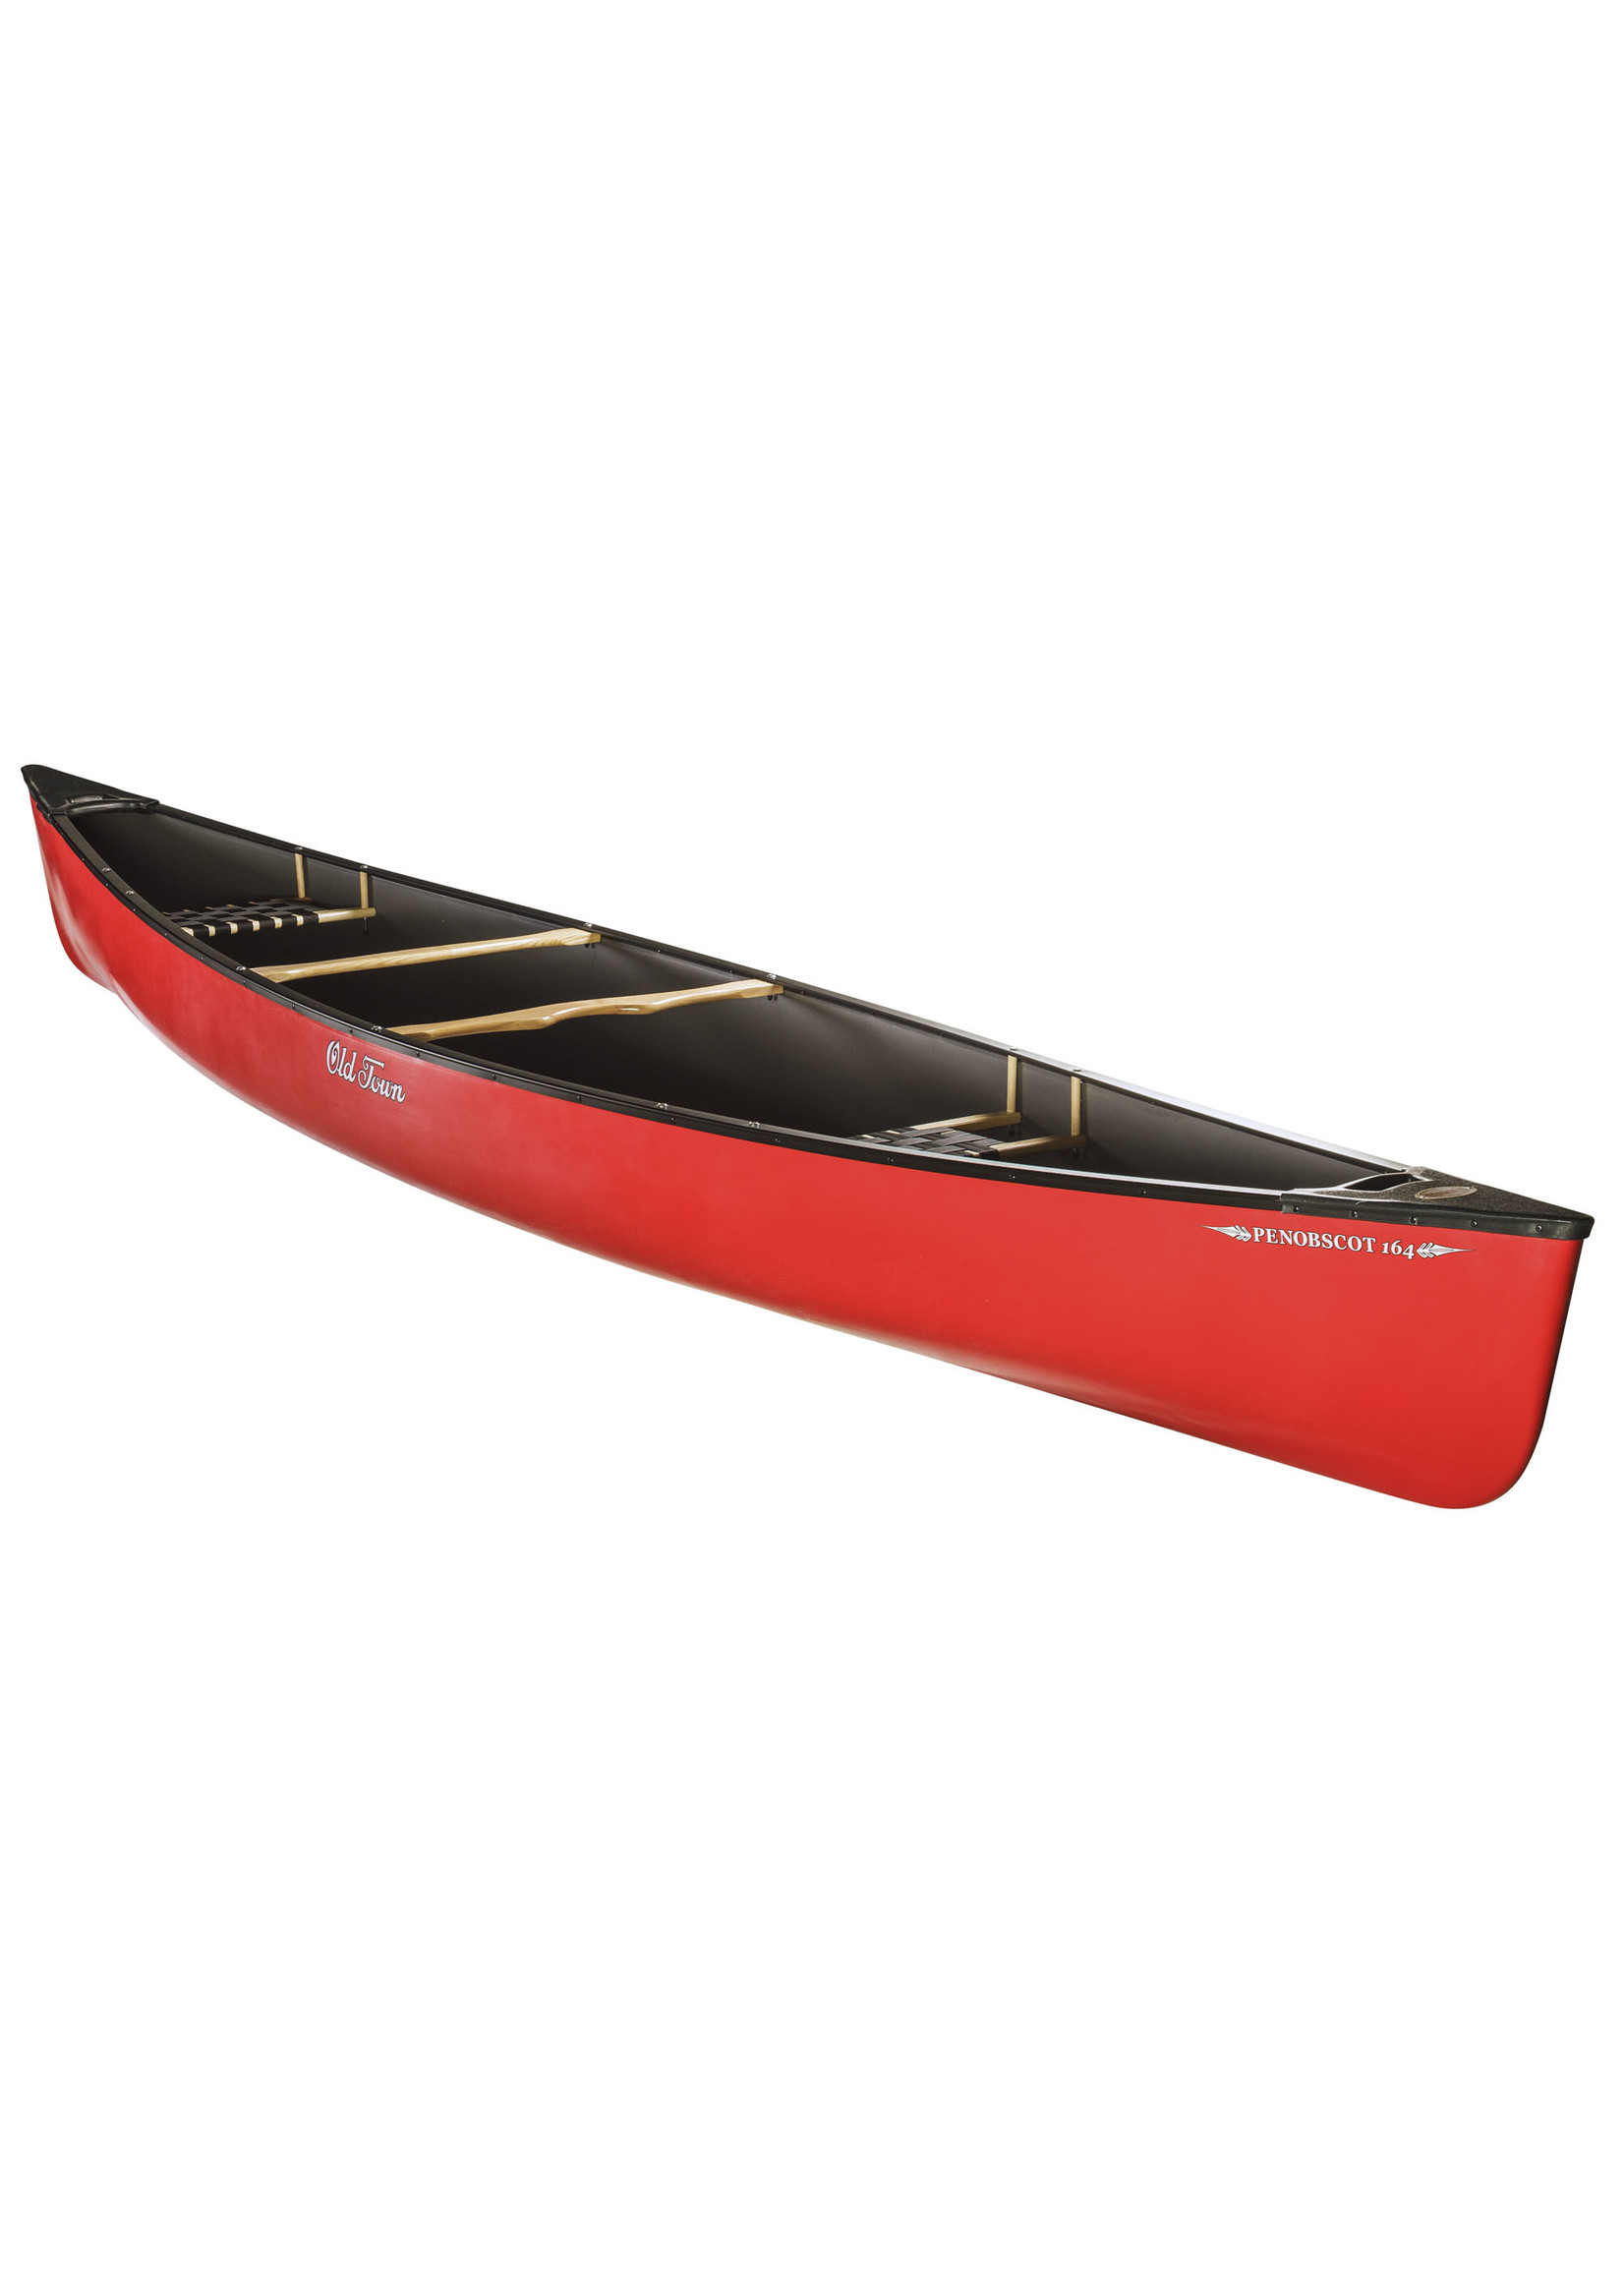 Old Town Old Town Penobscot Canoe